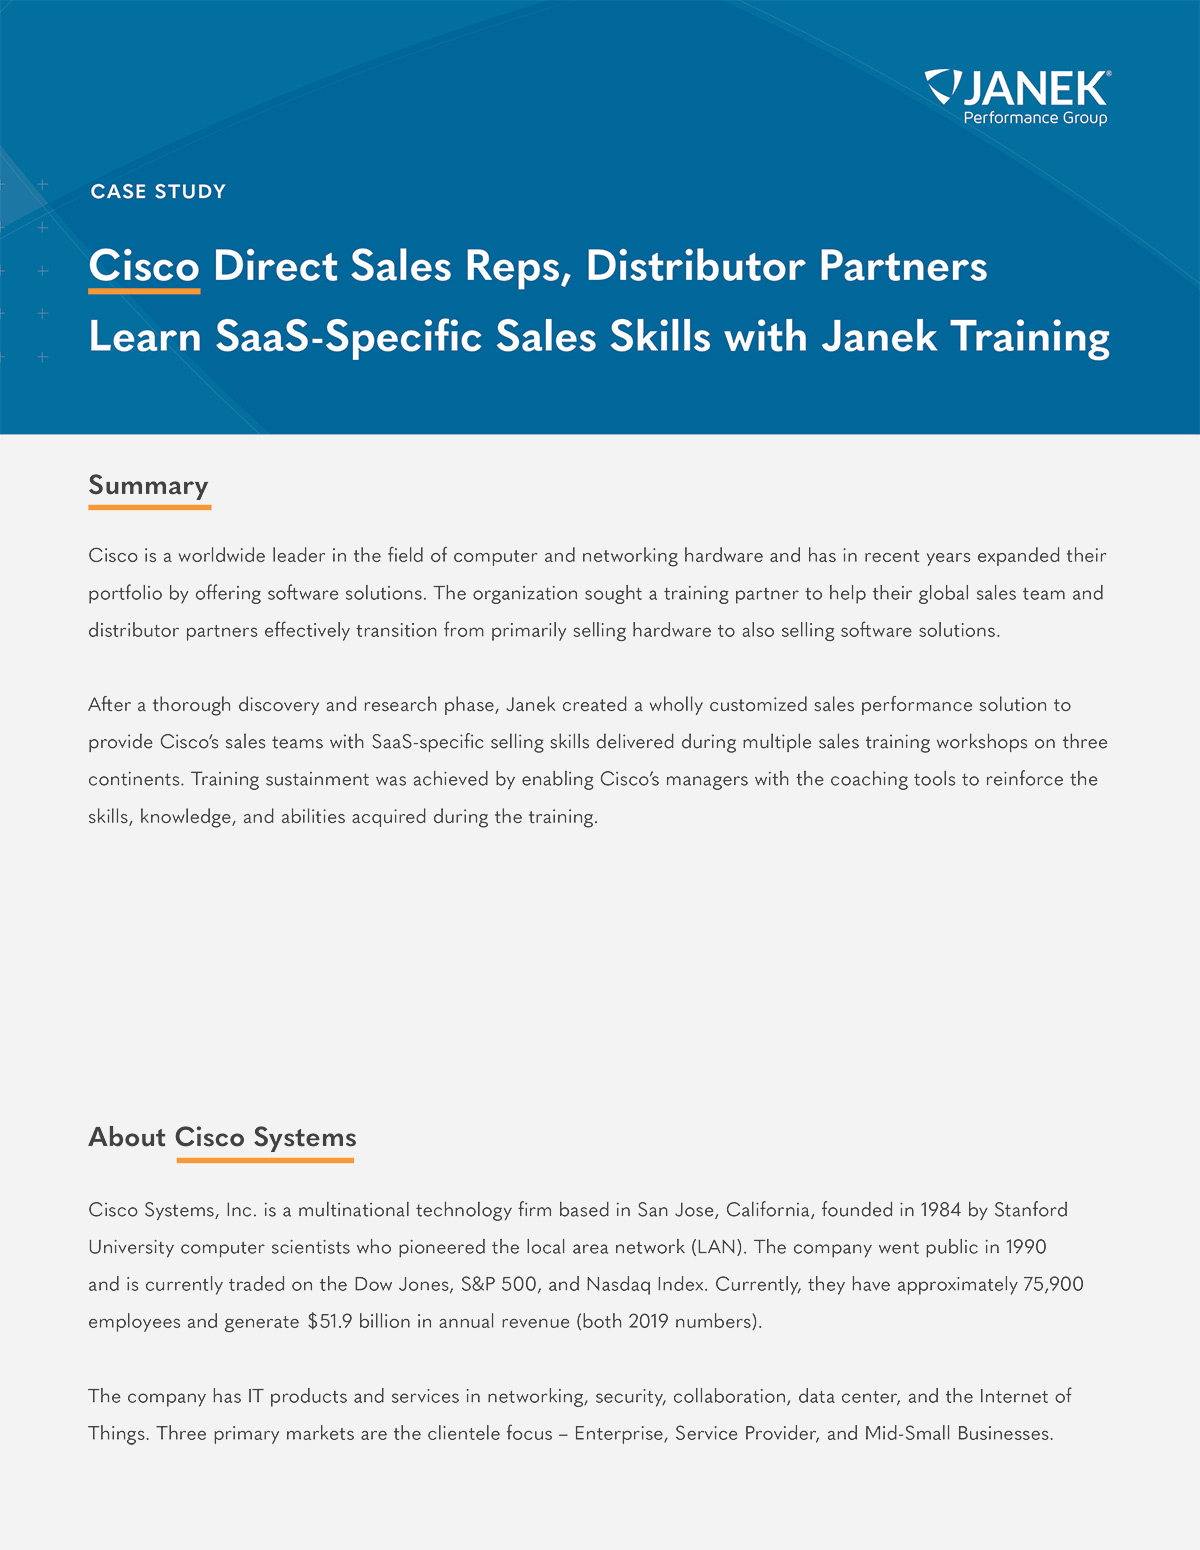 Cisco Direct Sales Reps, Distributor Partners Learn SaaS-Specific Sales Skills with Janek Training